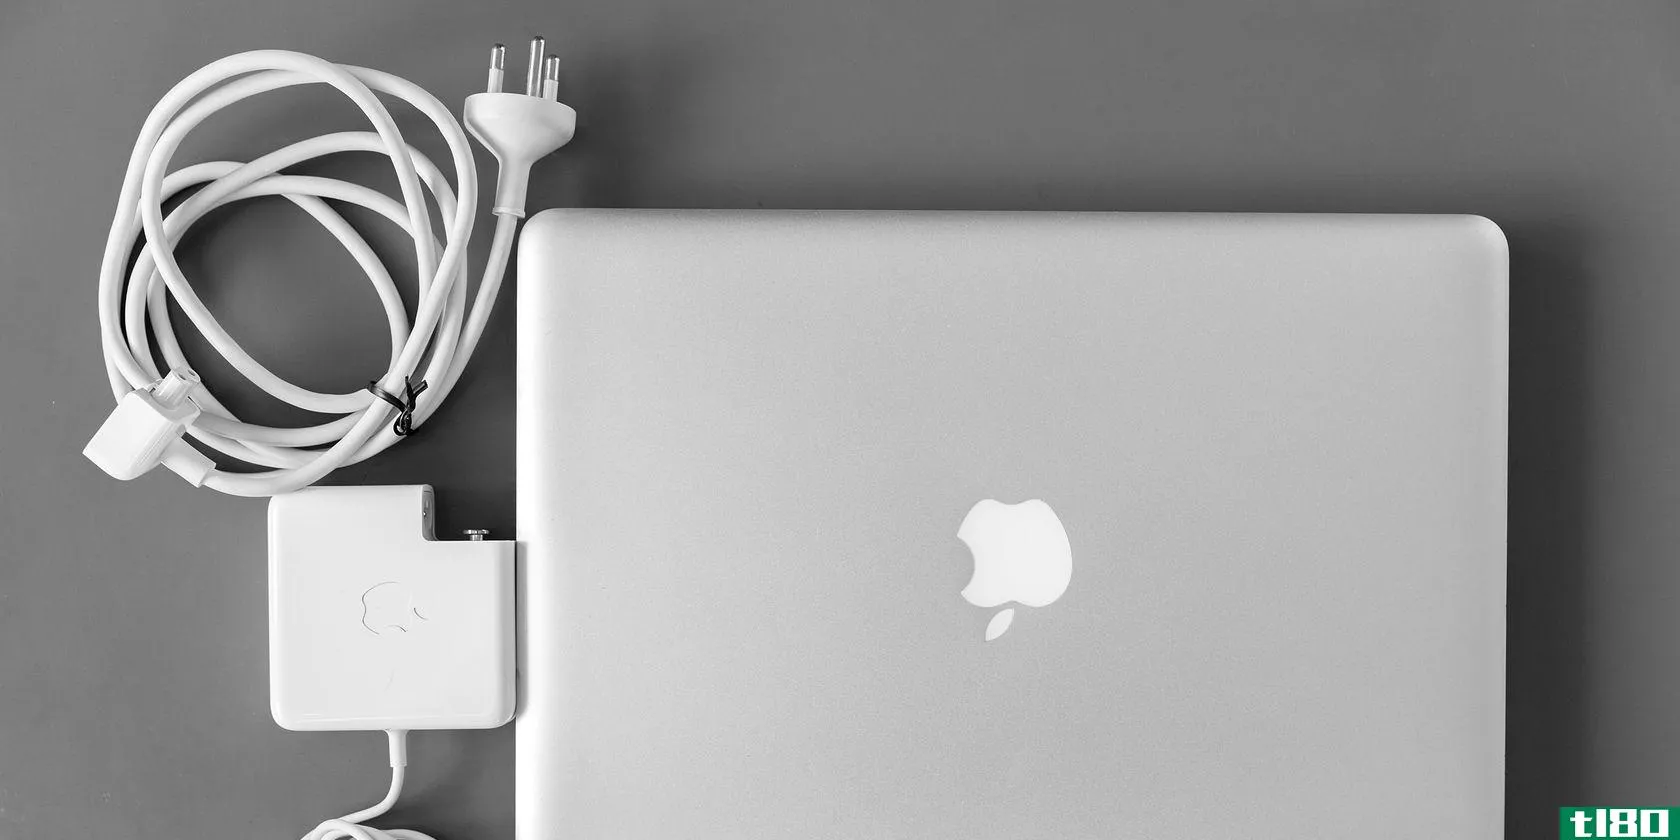 macbook-charging-chime-featured